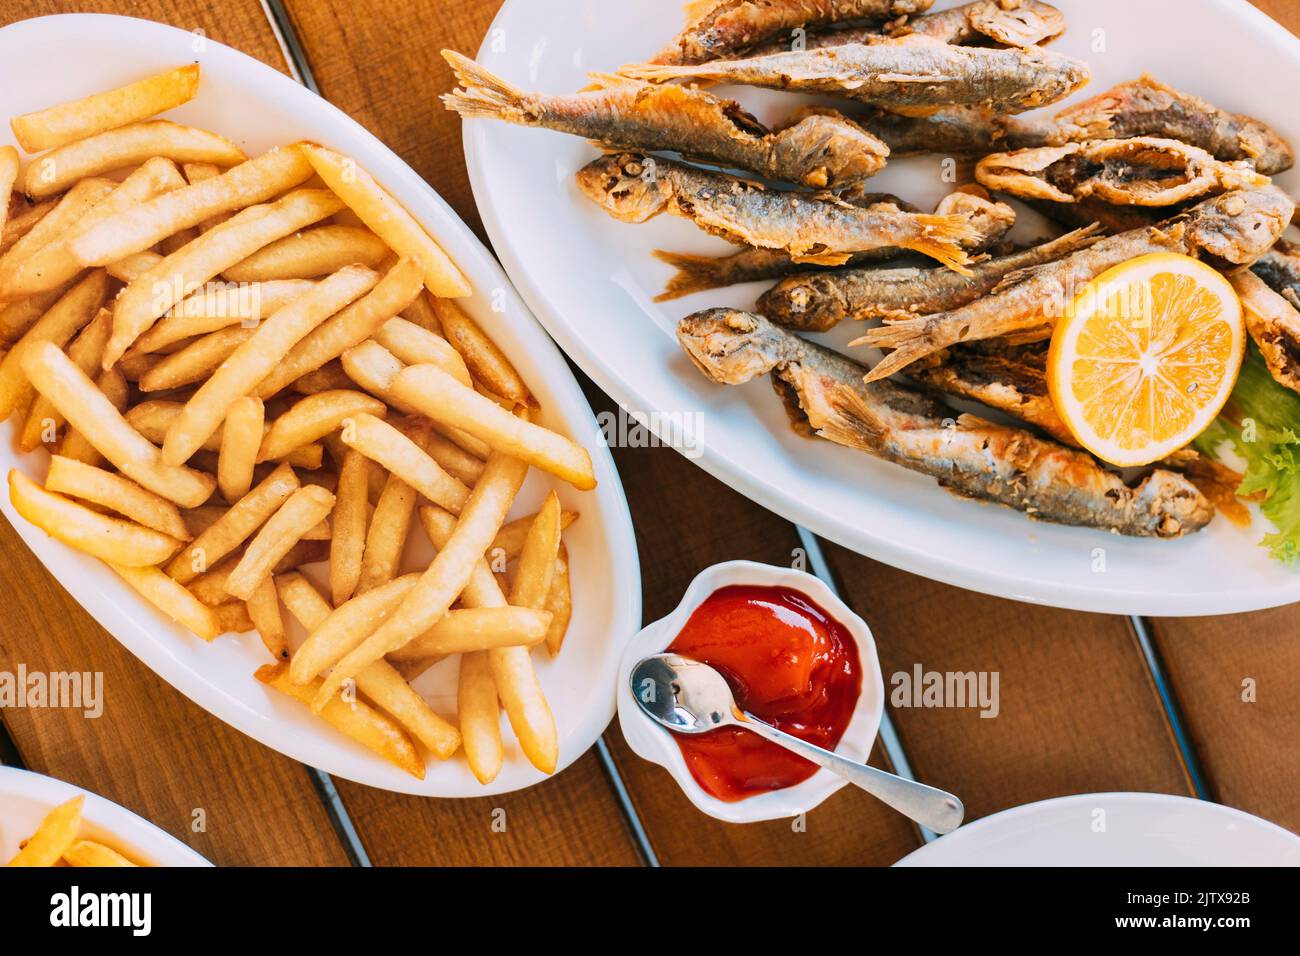 french fries and grilled fishes. fish and chips. Dish with Mullet Fish With orange. Fried fry small fishes. Stock Photo